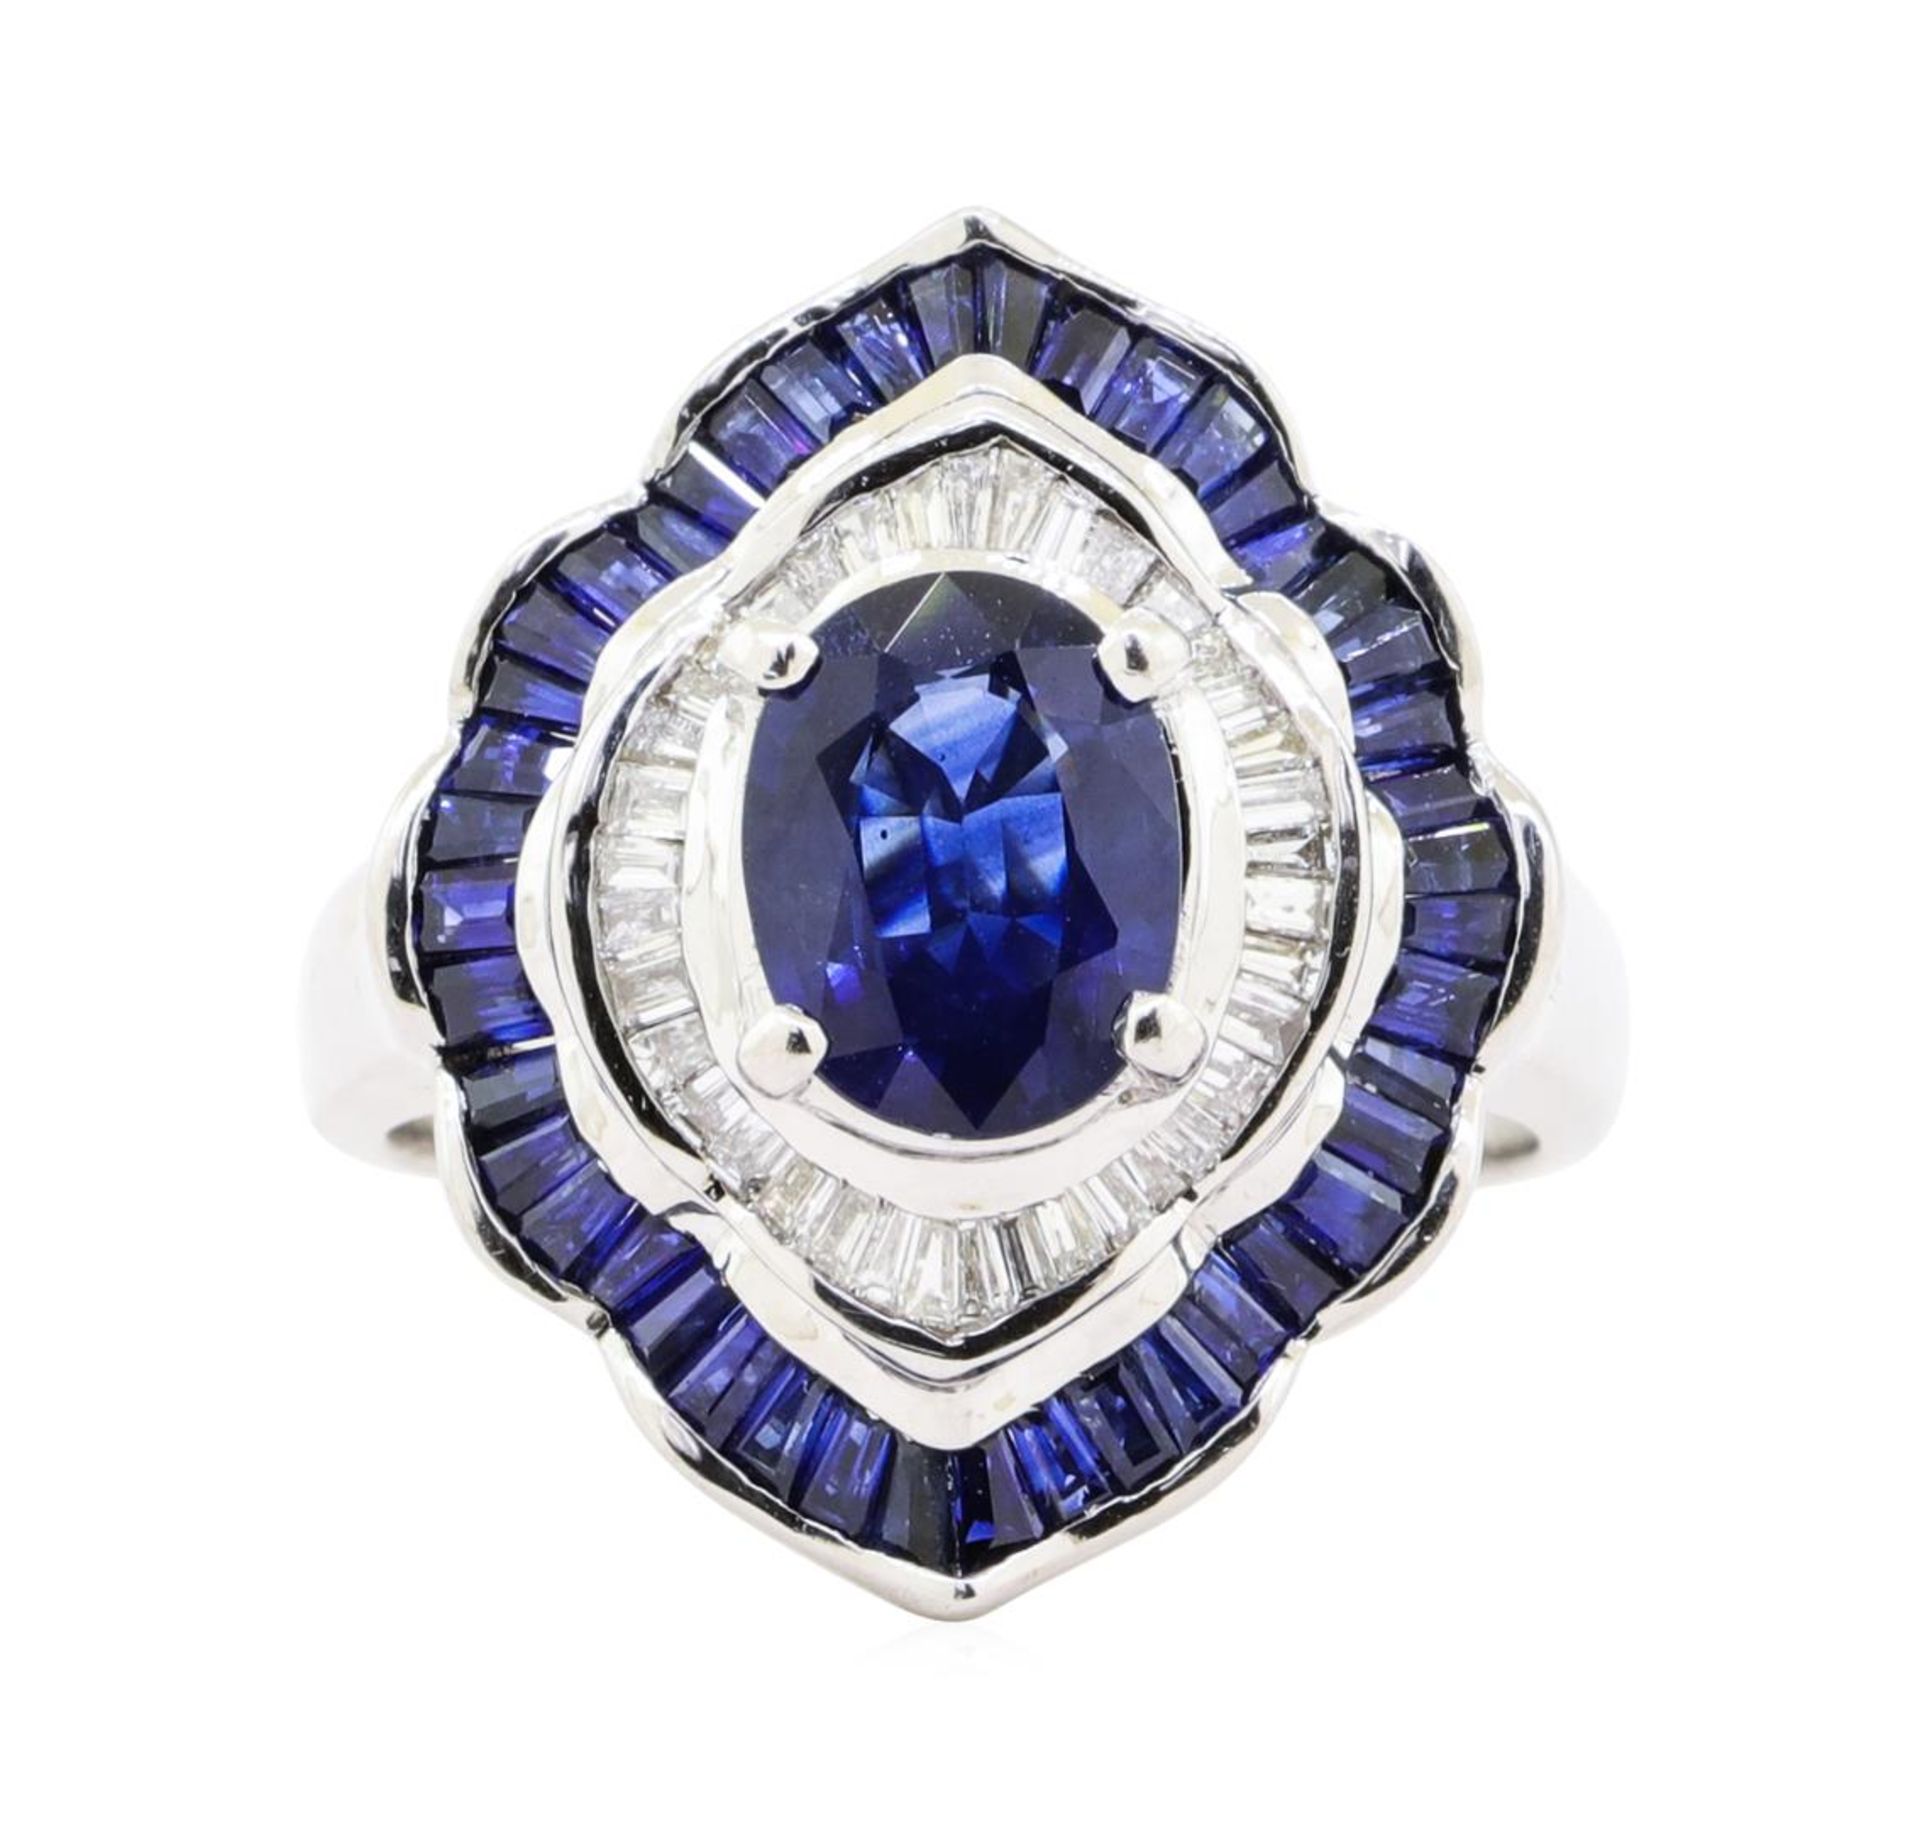 3.20 ctw Sapphire and Diamond Ring - 14KT White Gold - Image 2 of 5